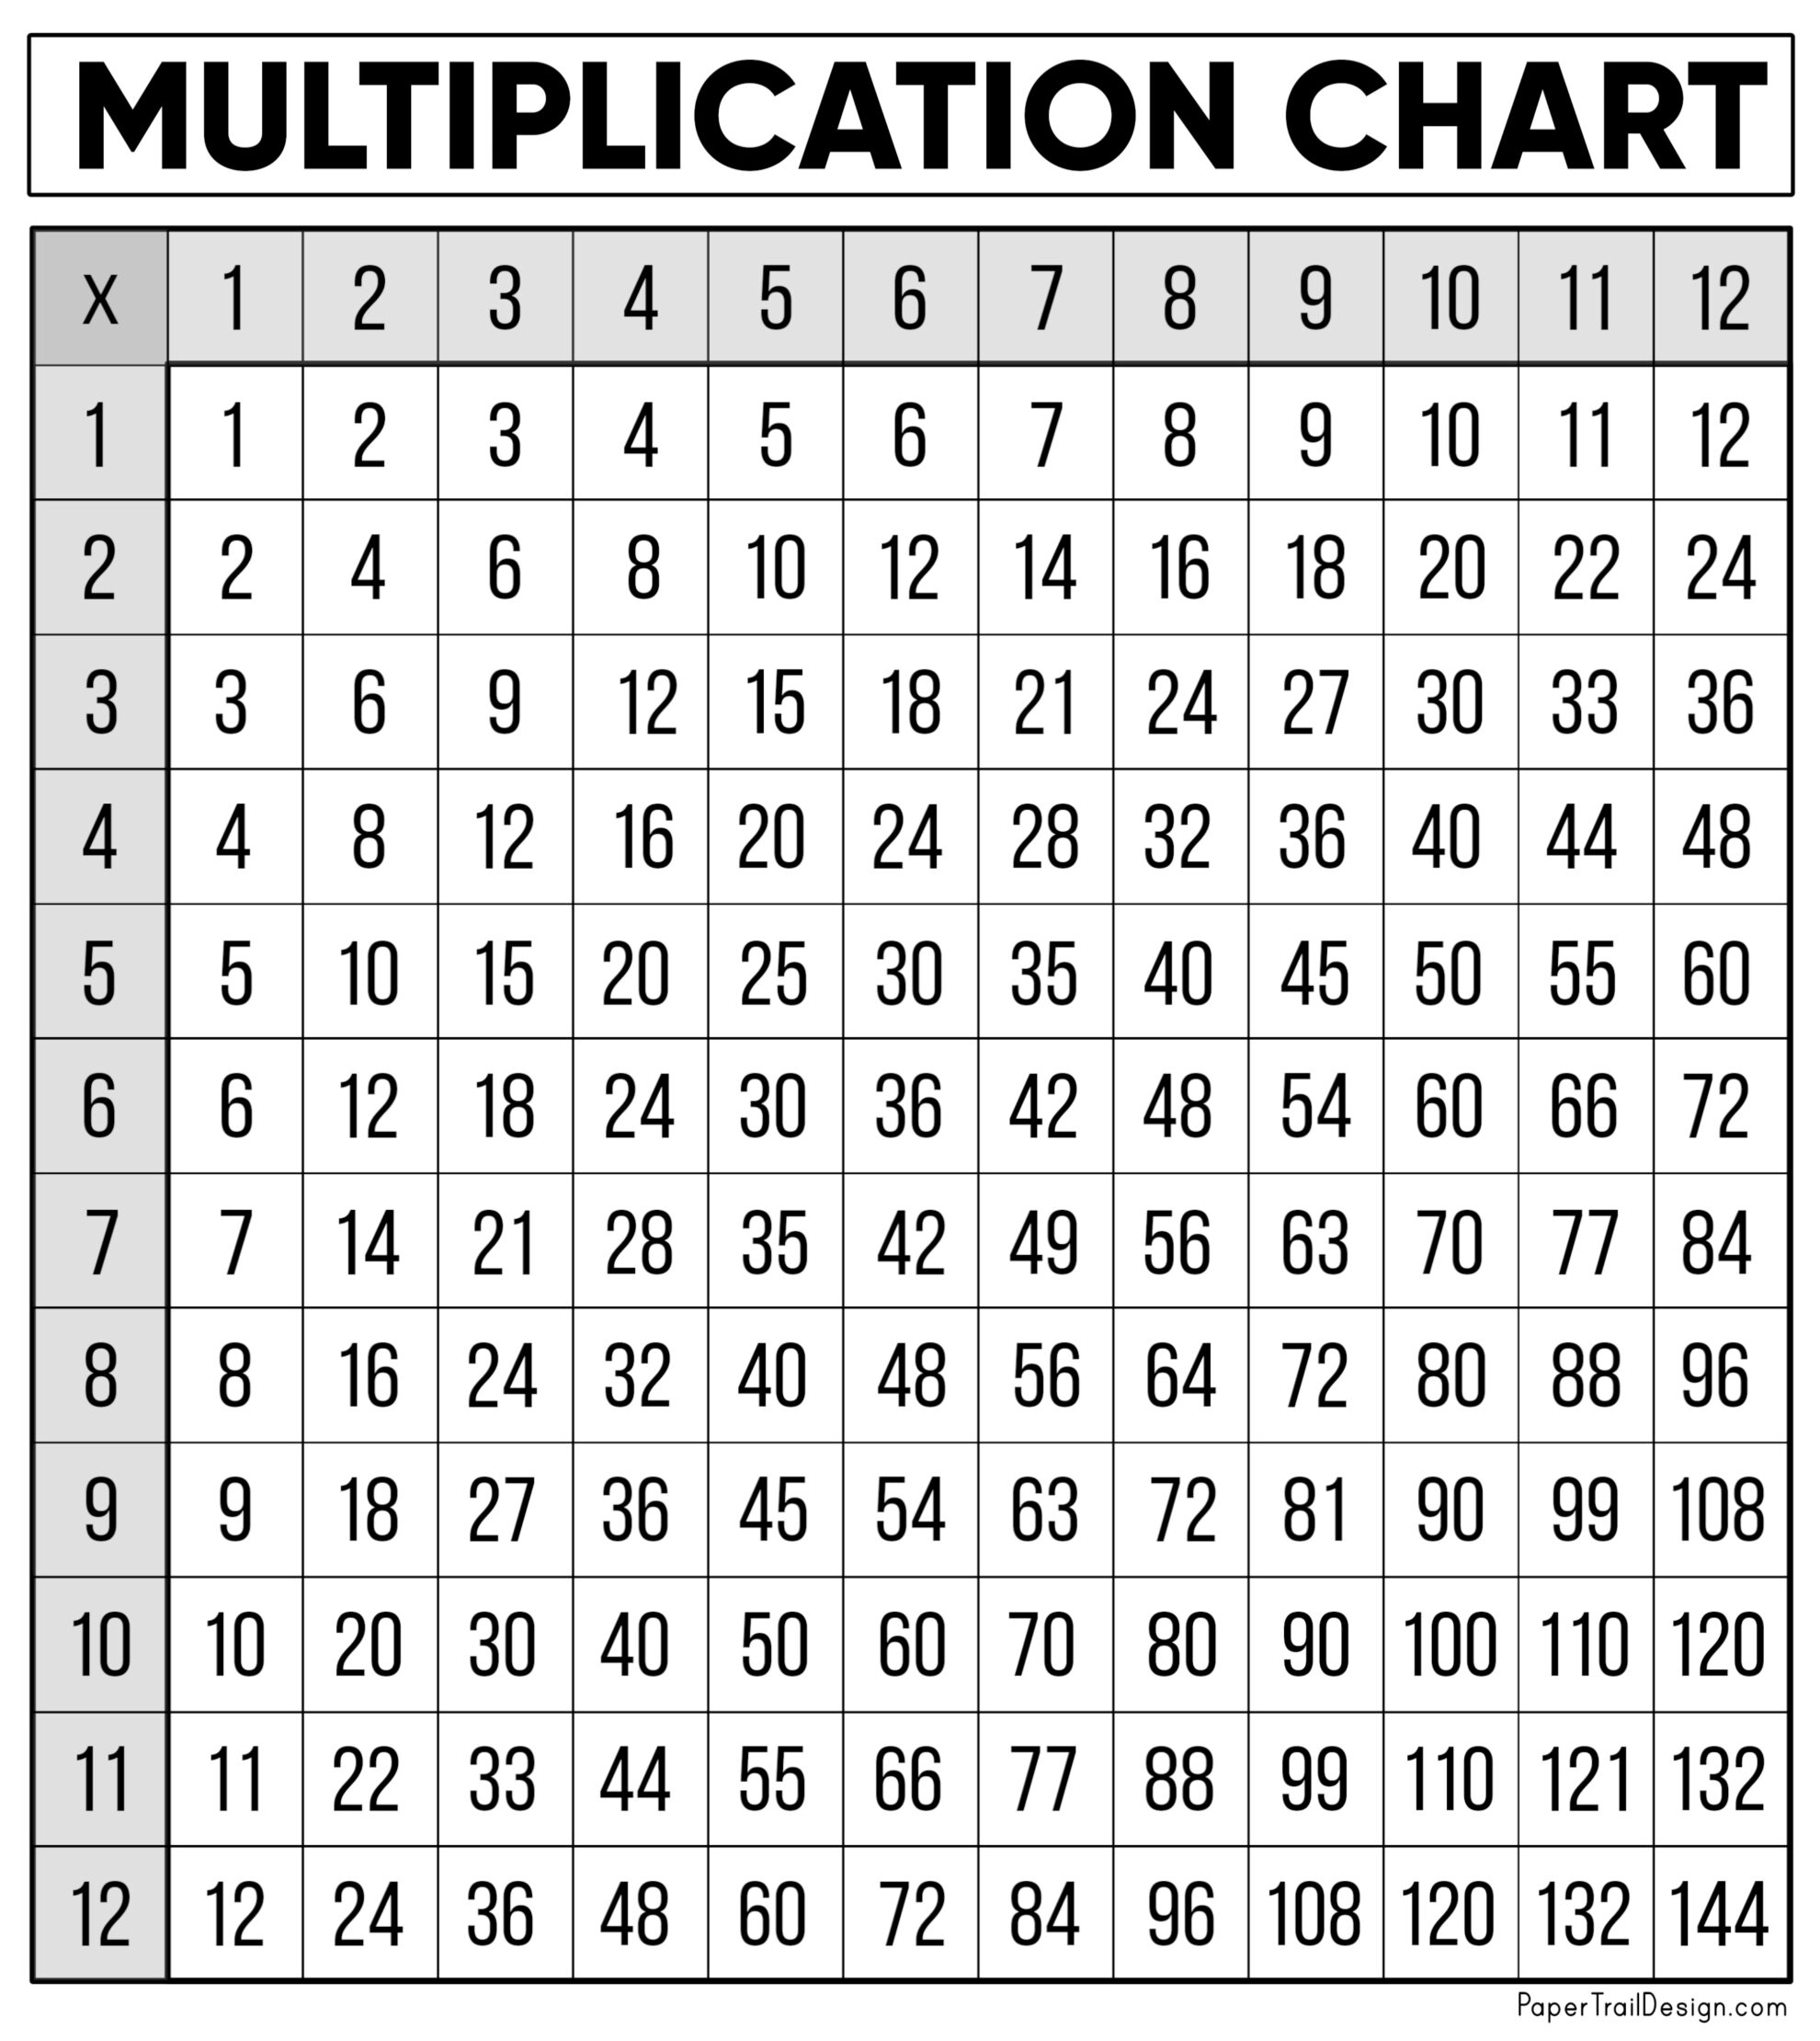 Free Multiplication Chart Printable - Paper Trail Design for Free Printable Math Multiplication Charts